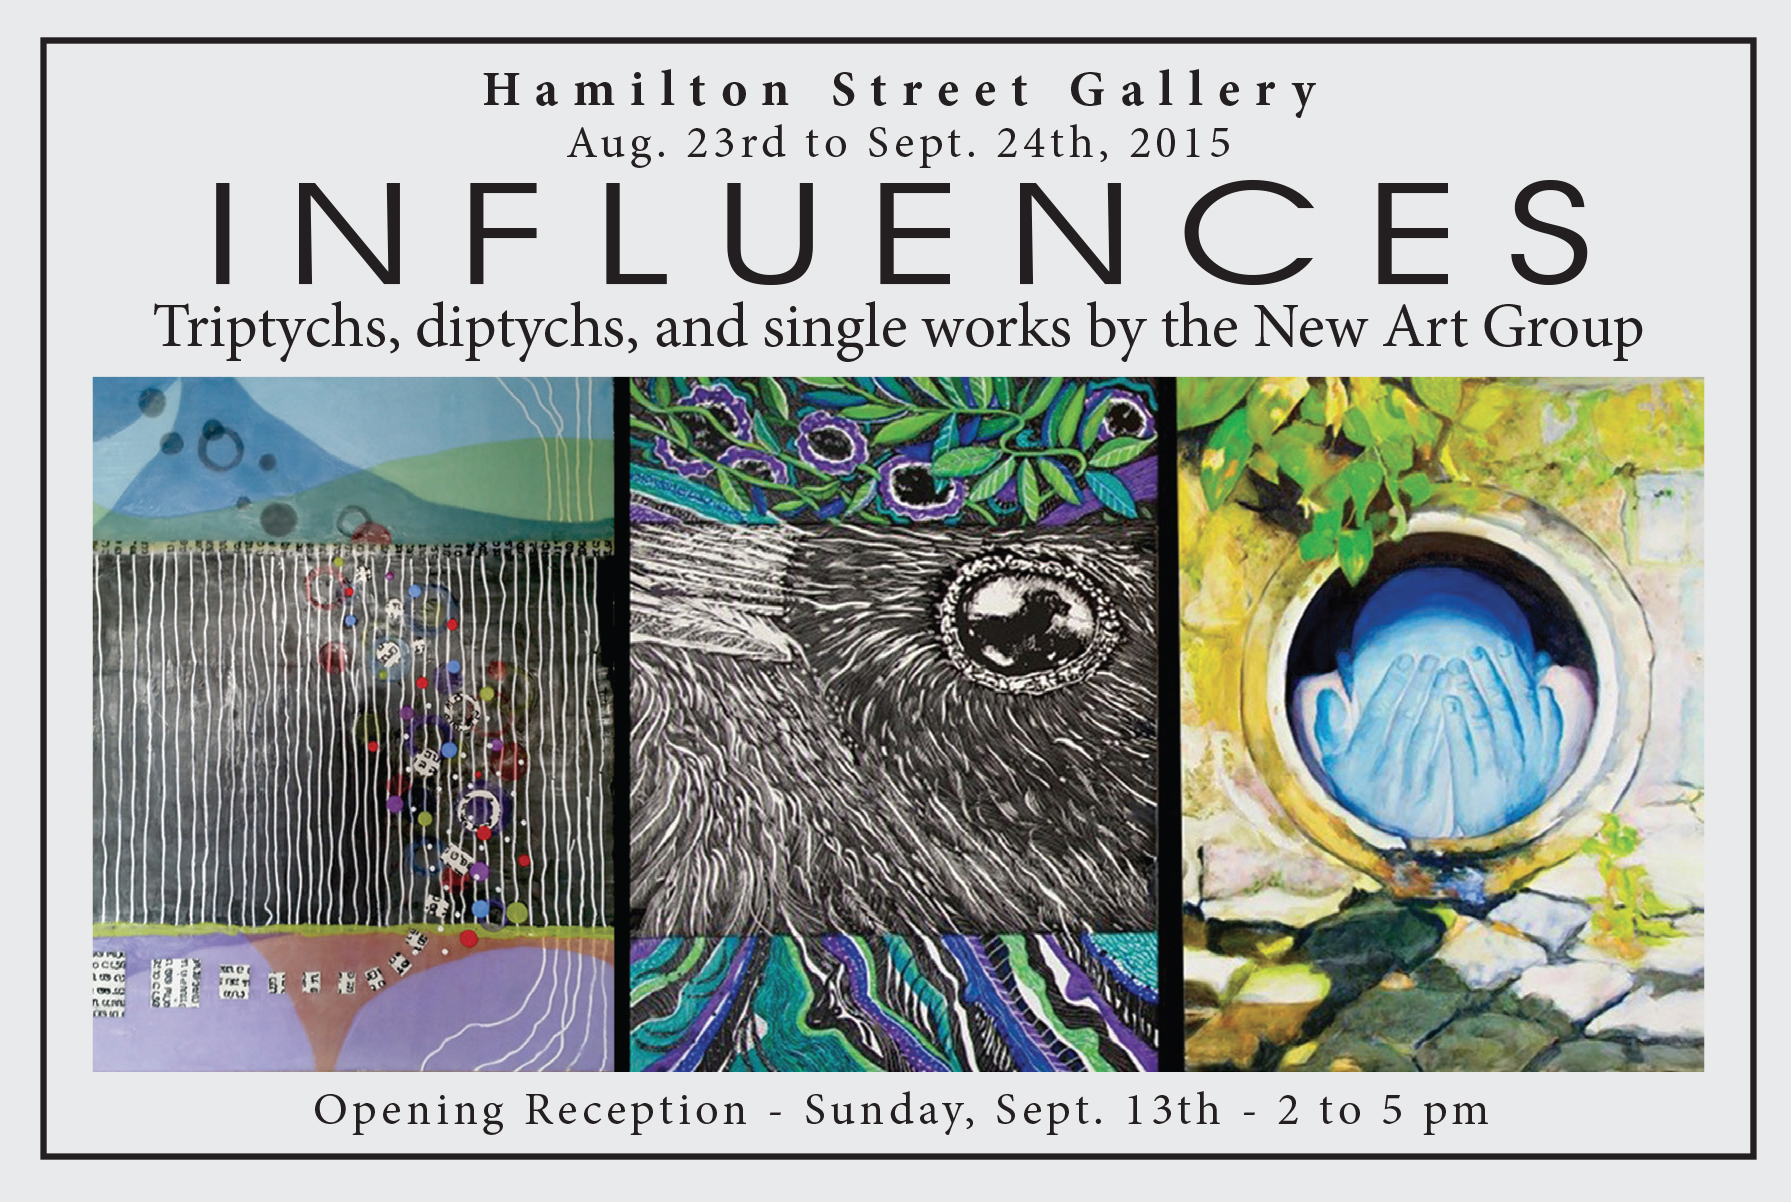 “Influences” exhibition opens at Hamilton Street Gallery in Bound Brook